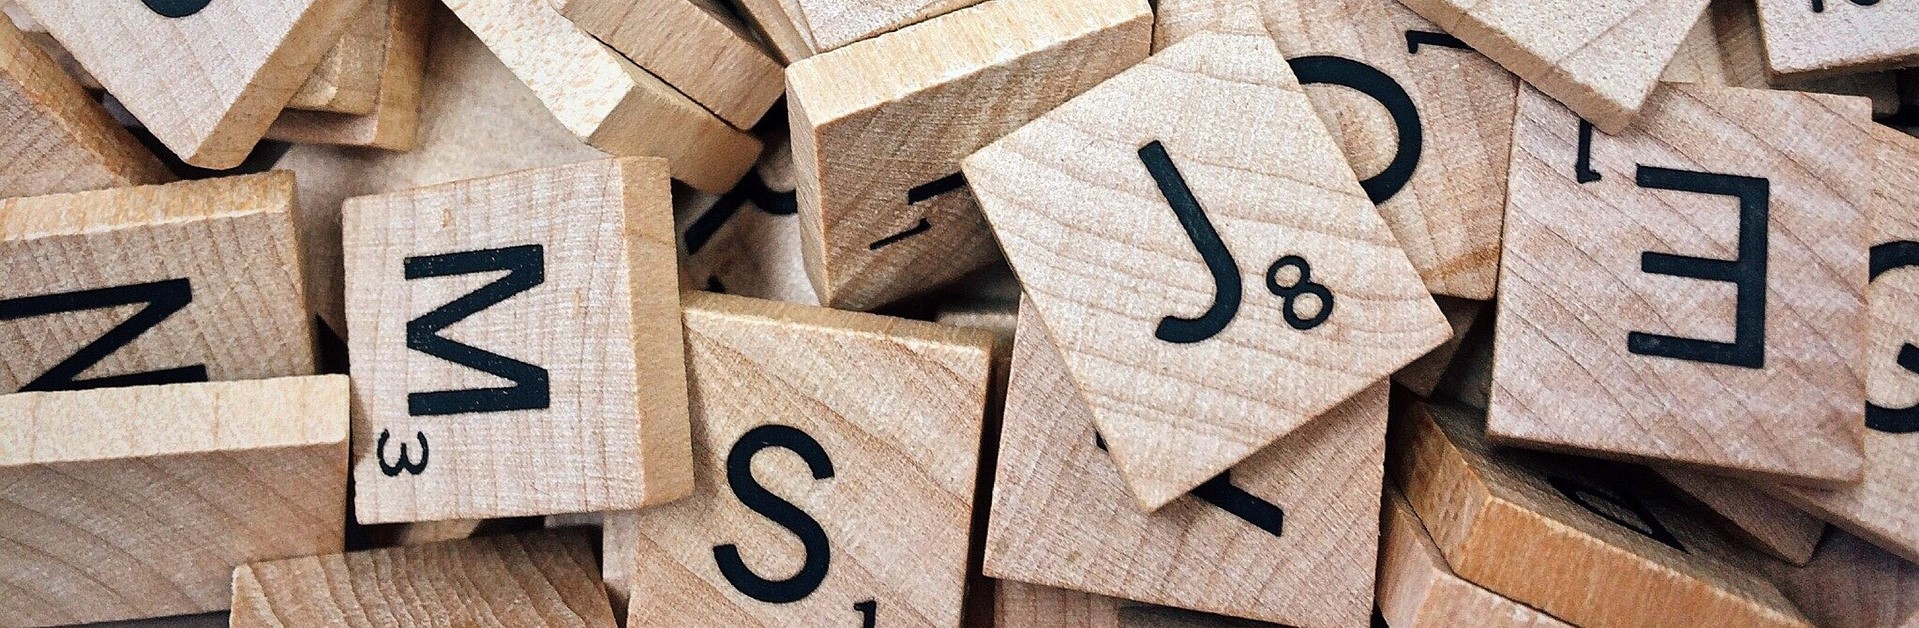 Scrabble Letters to Make Words